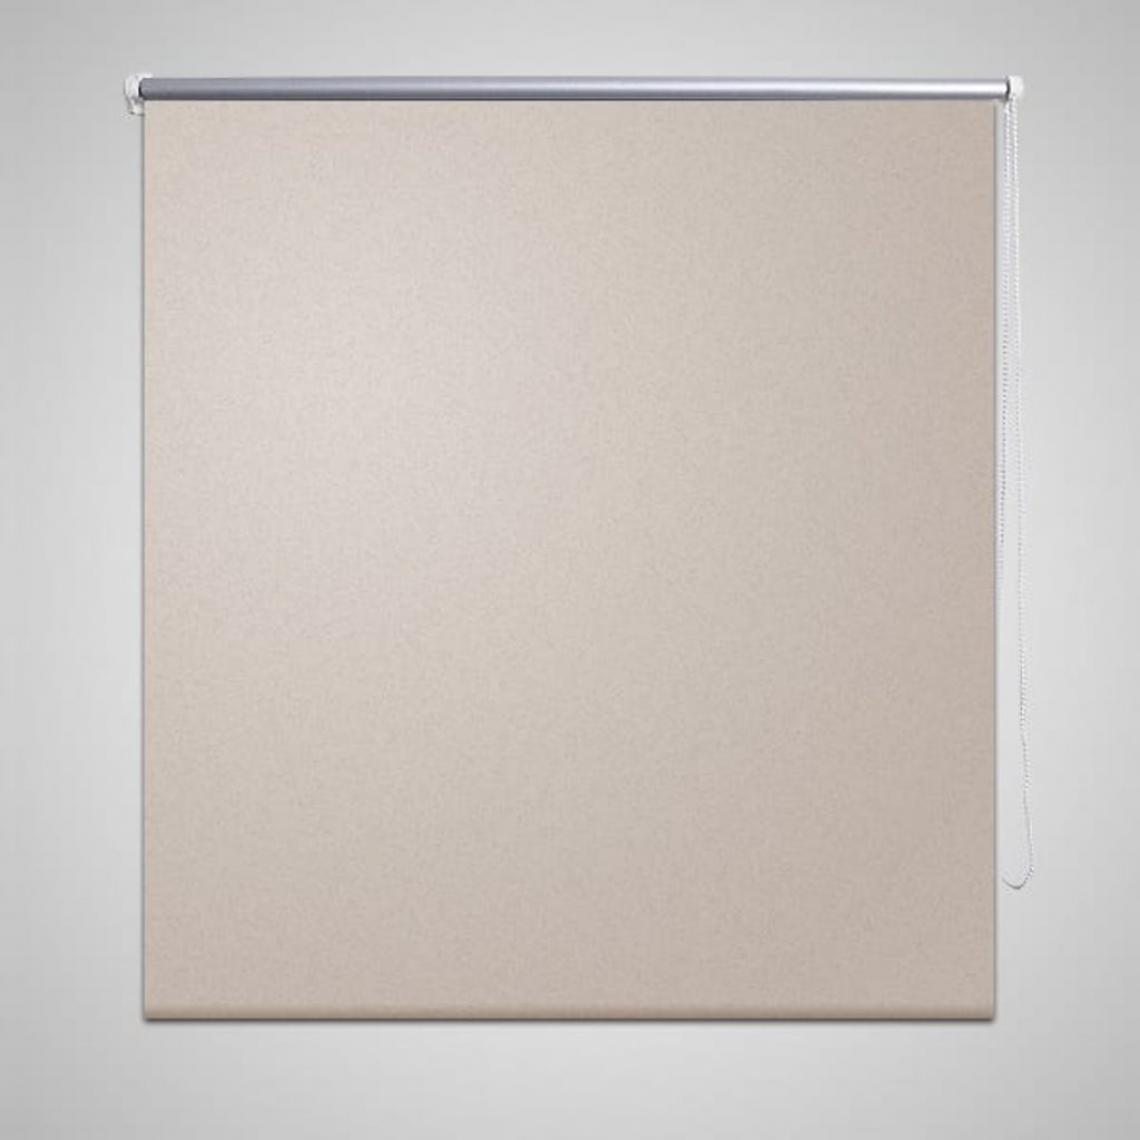 Chunhelife - Store enrouleur occultant beige 60 x 120 cm - Store banne